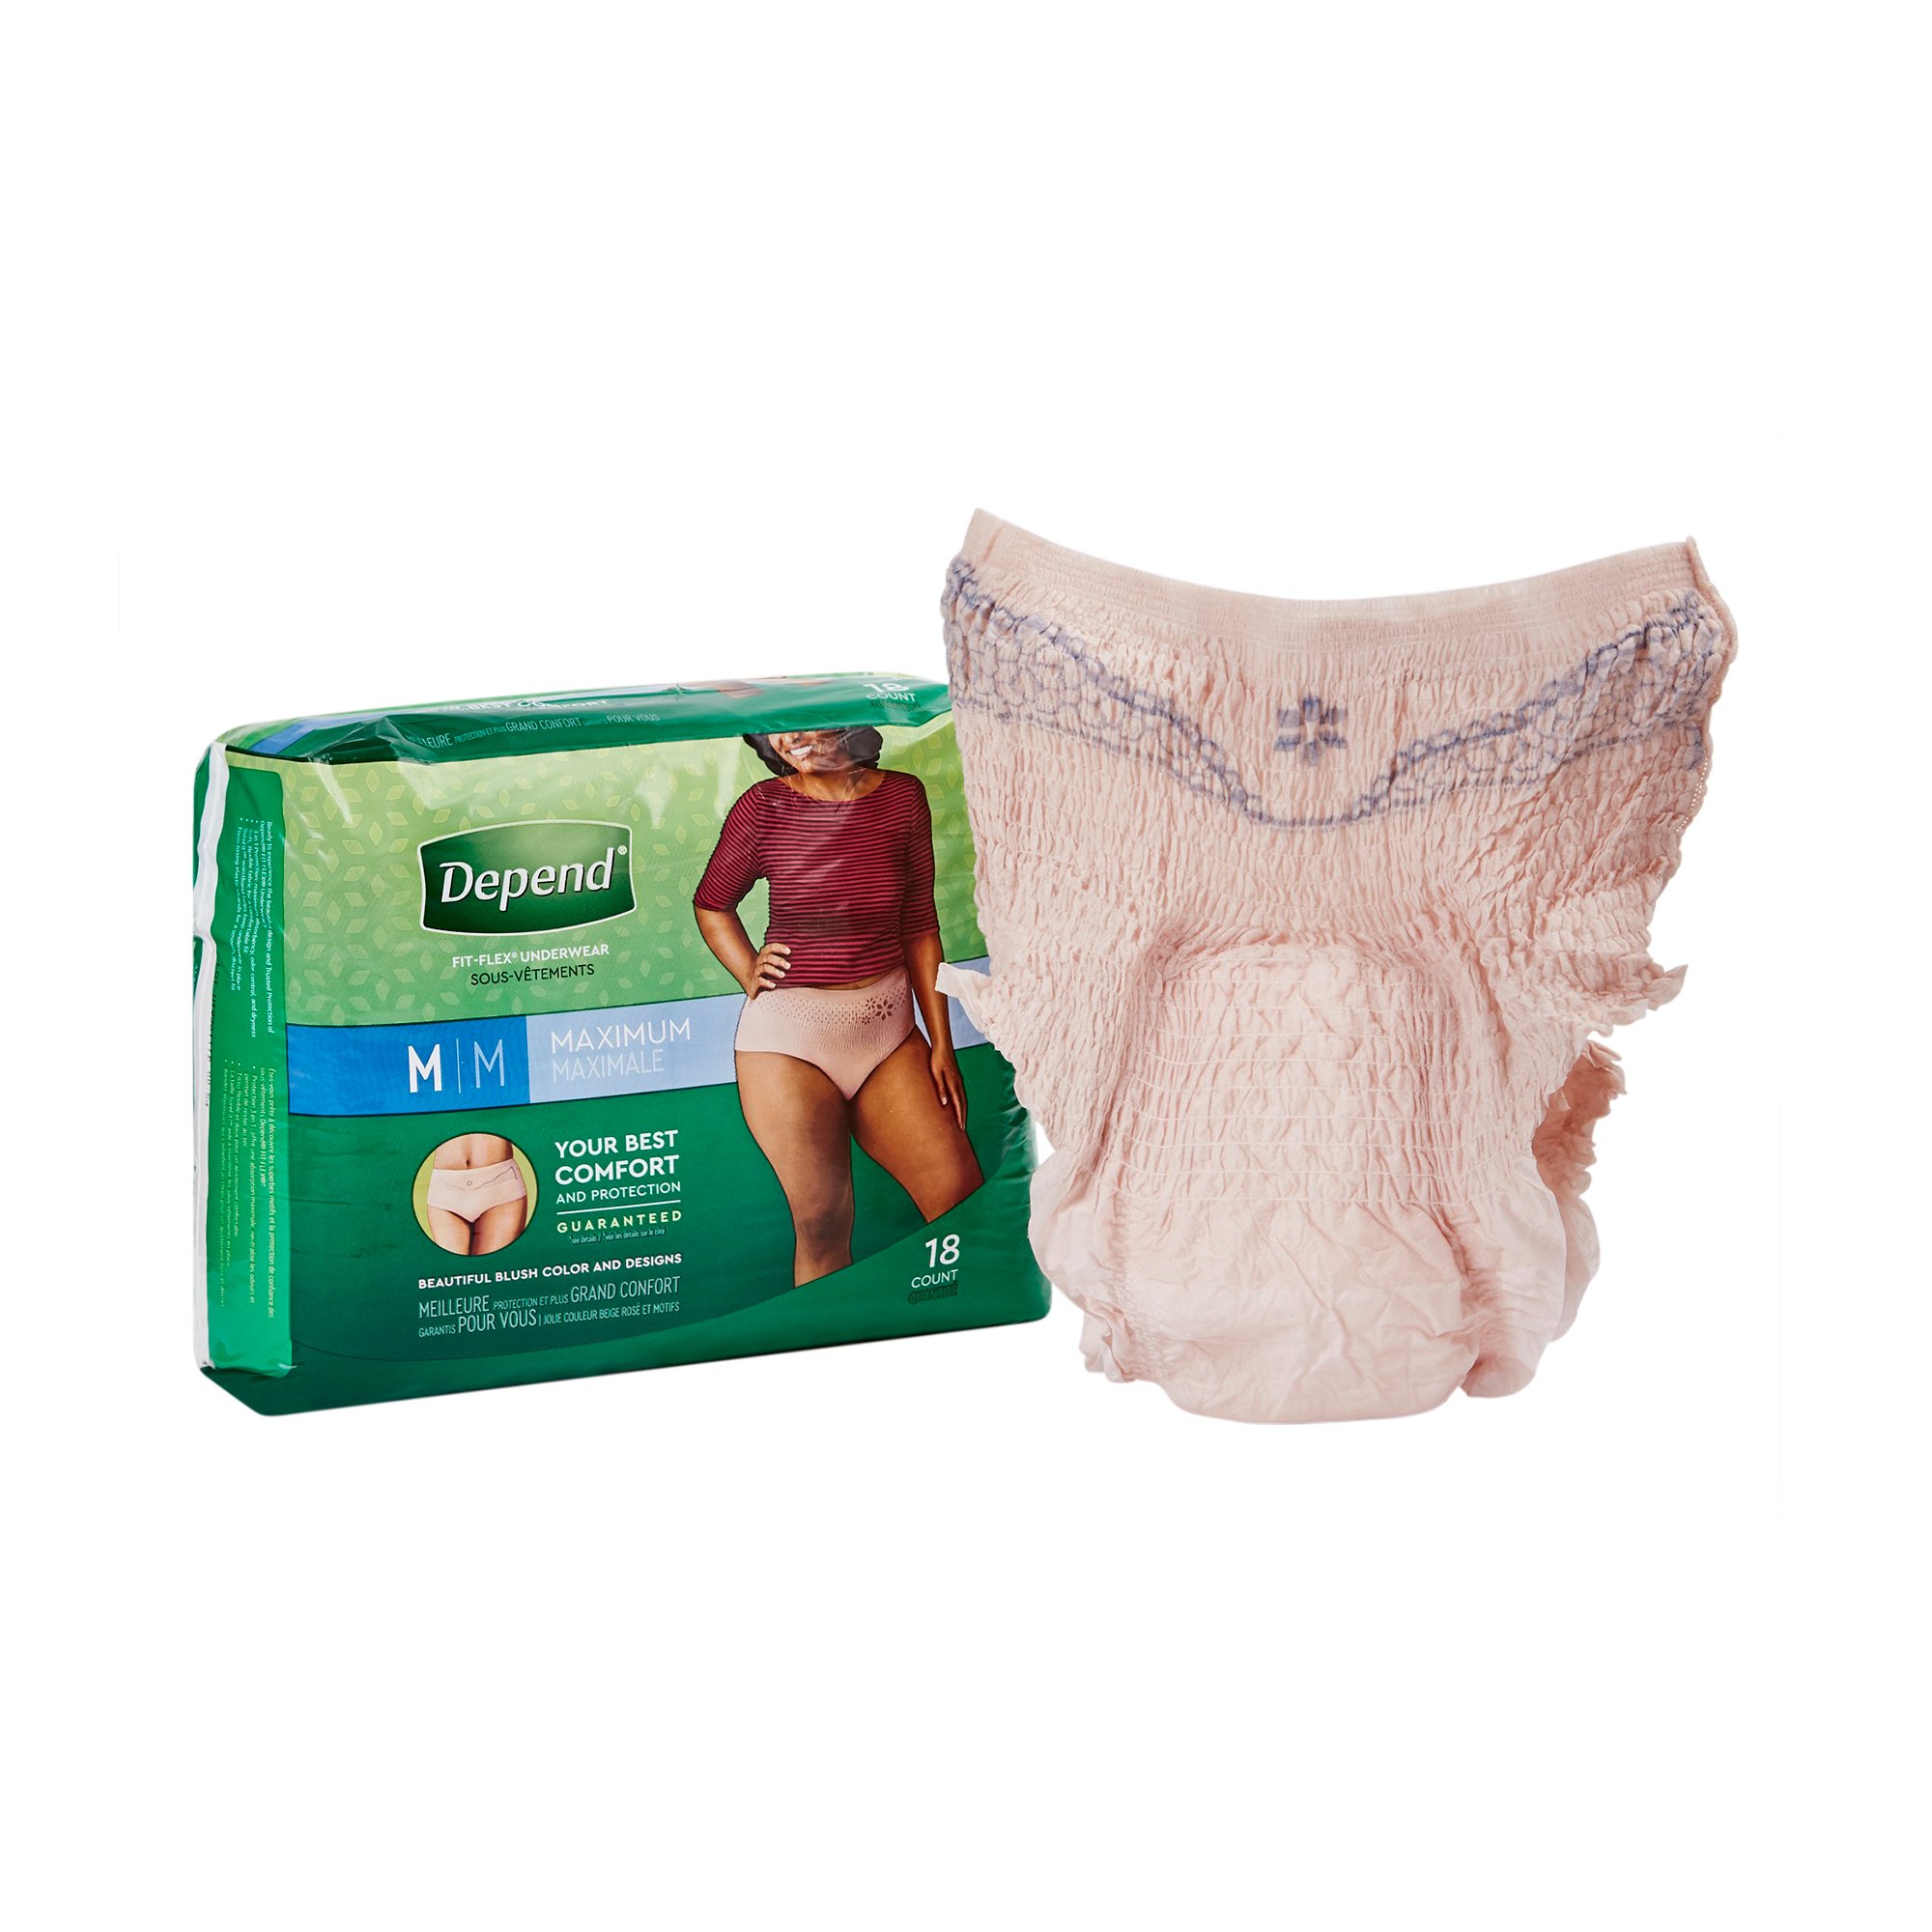 Depend Fit-Flex Incontinence Underwear For Women, Maximum Absorbency, M,  Blush, 18 Count